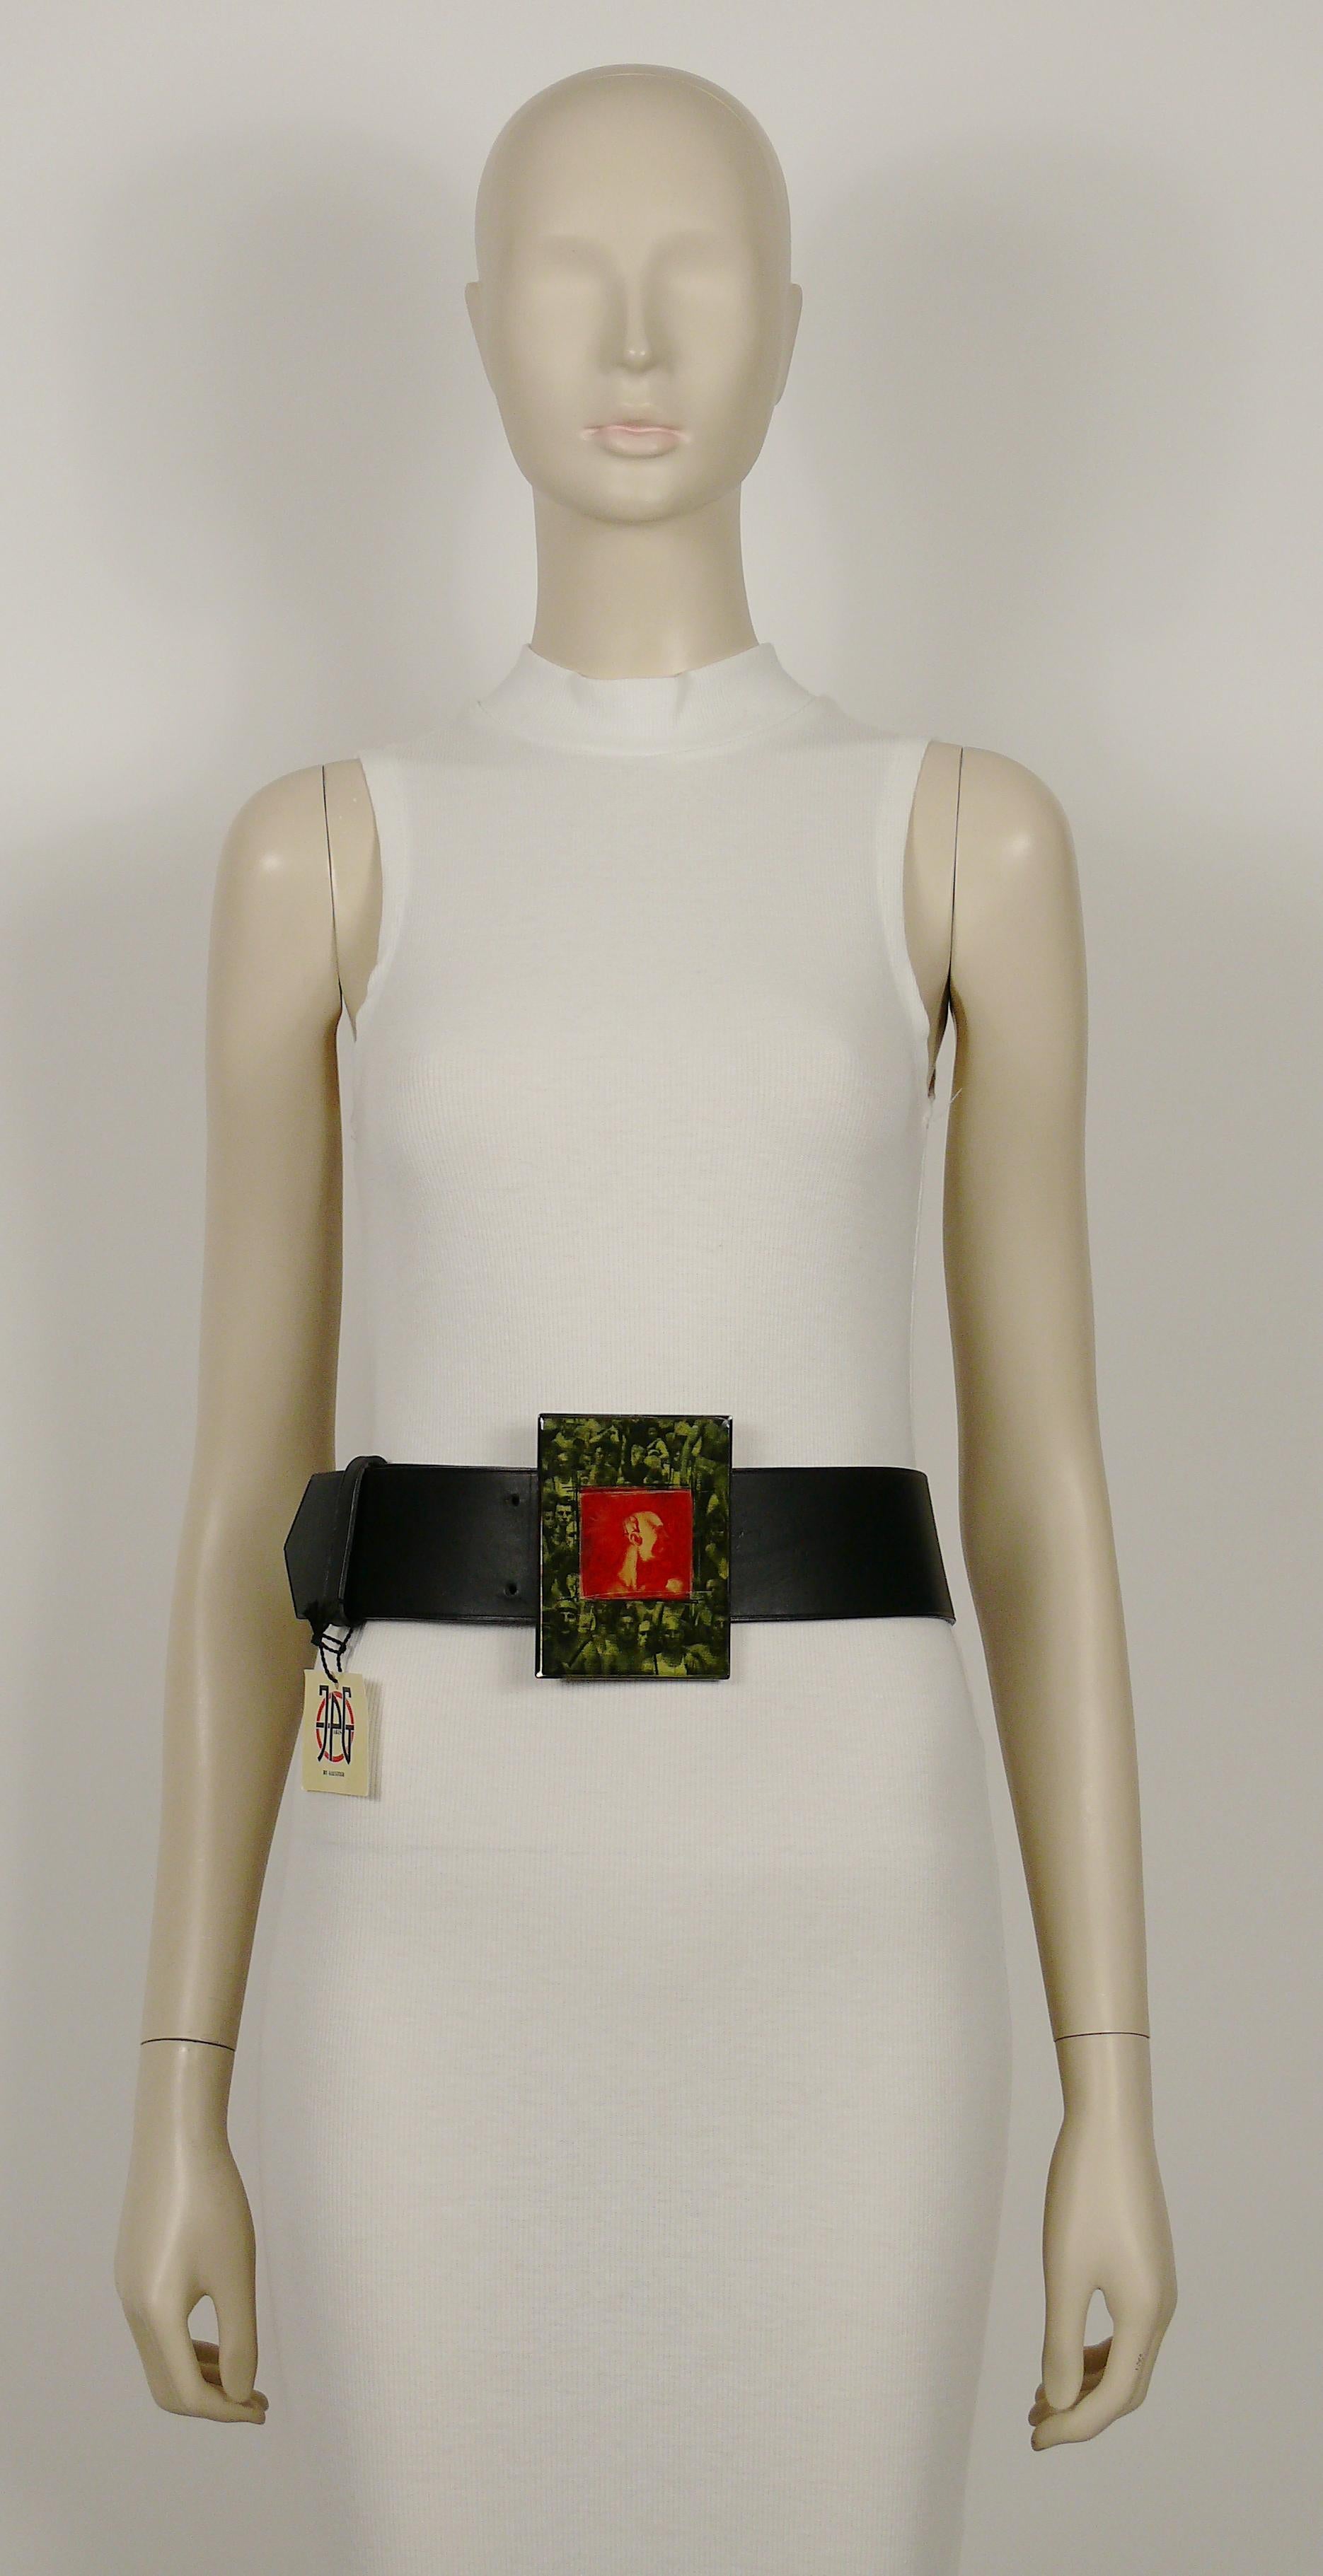 JEAN PAUL GAULTIER vintage wide black leather belt featuring a massive frame buckle printed with a punk and gay scene.

Embossed JEAN PAUL GAULTIER Made in Italy.

Indicated size : 80.

Indicative measurements : adjustable length from approx. 76.5